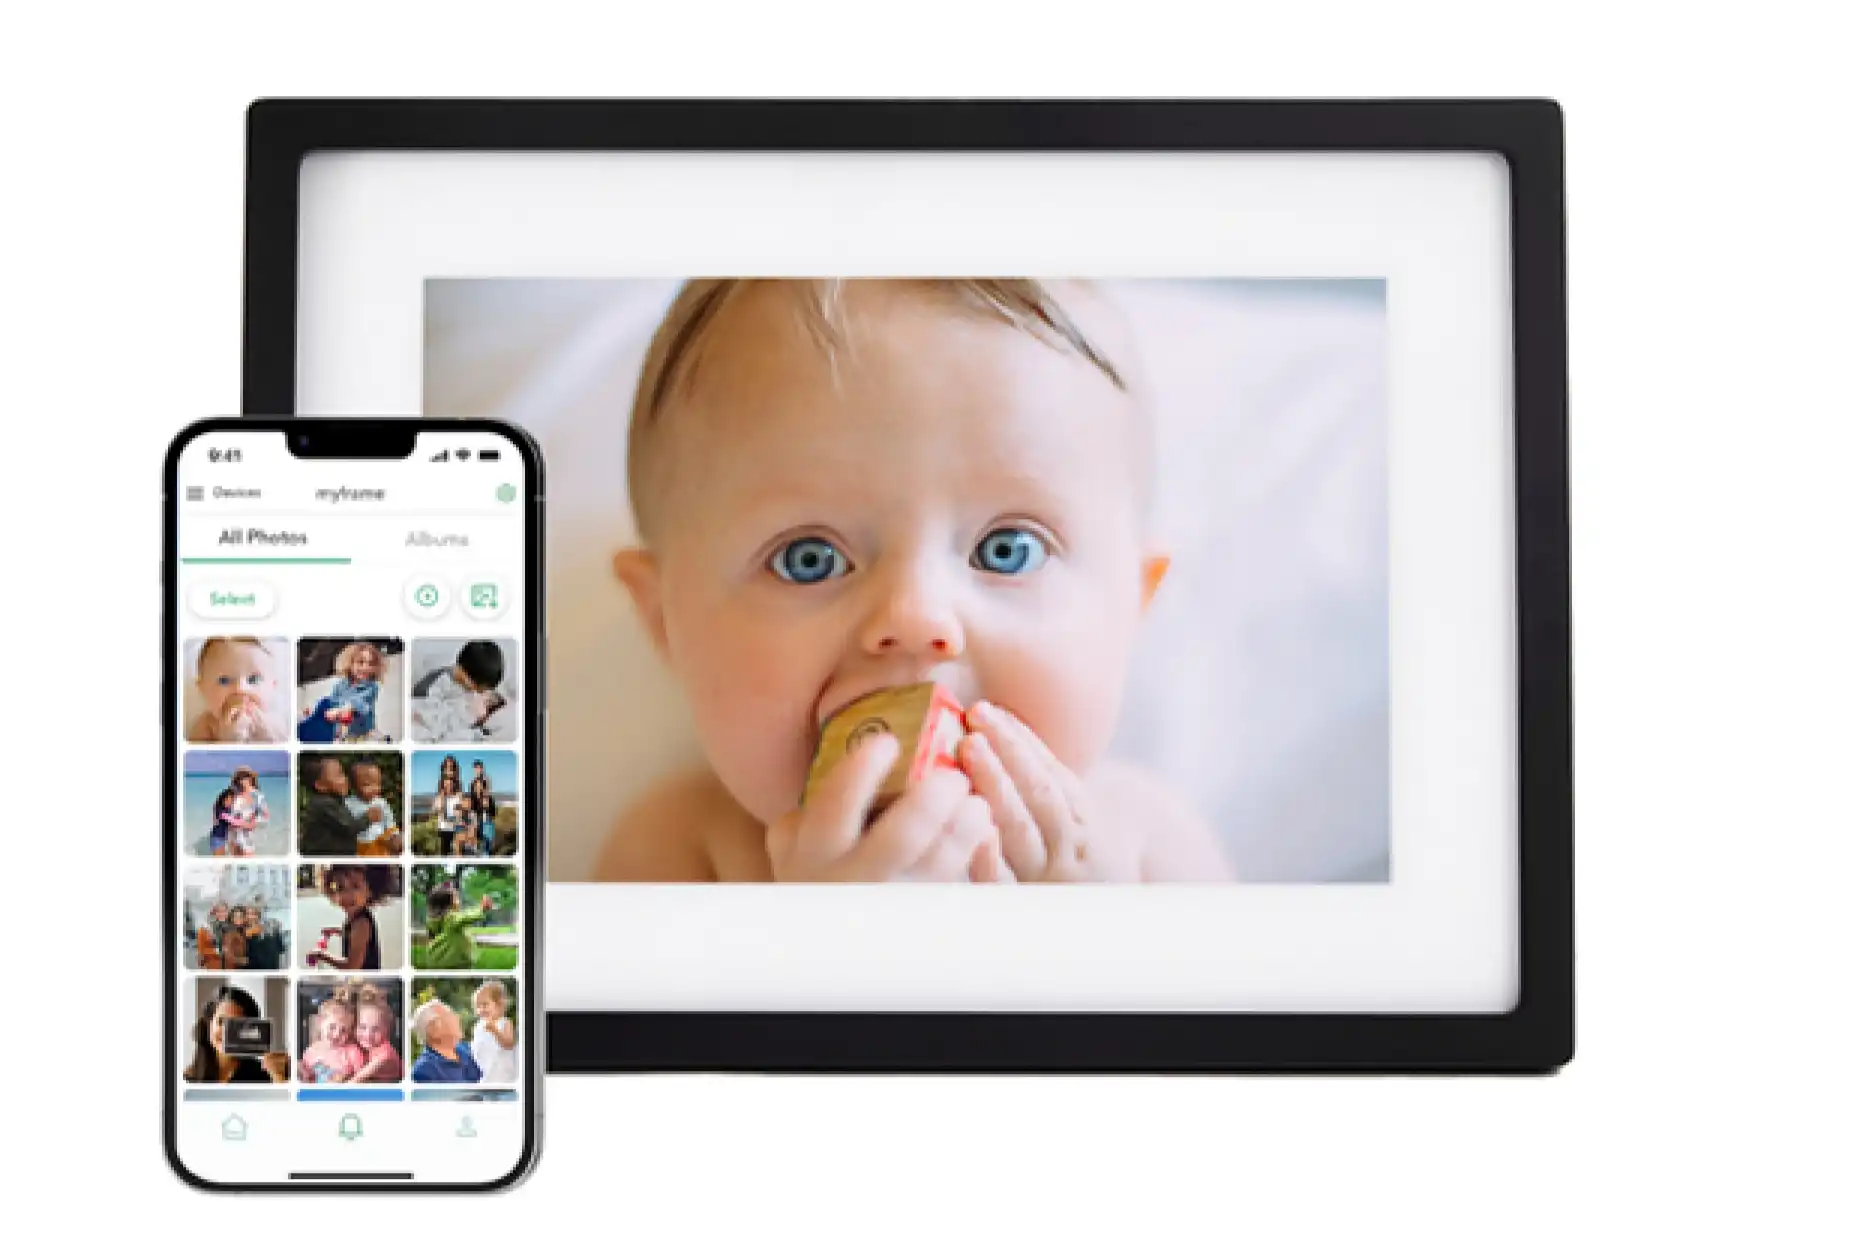 Iphone showing the photo gallary in front of a newly uploaded blue eyed baby onto the skylight frame